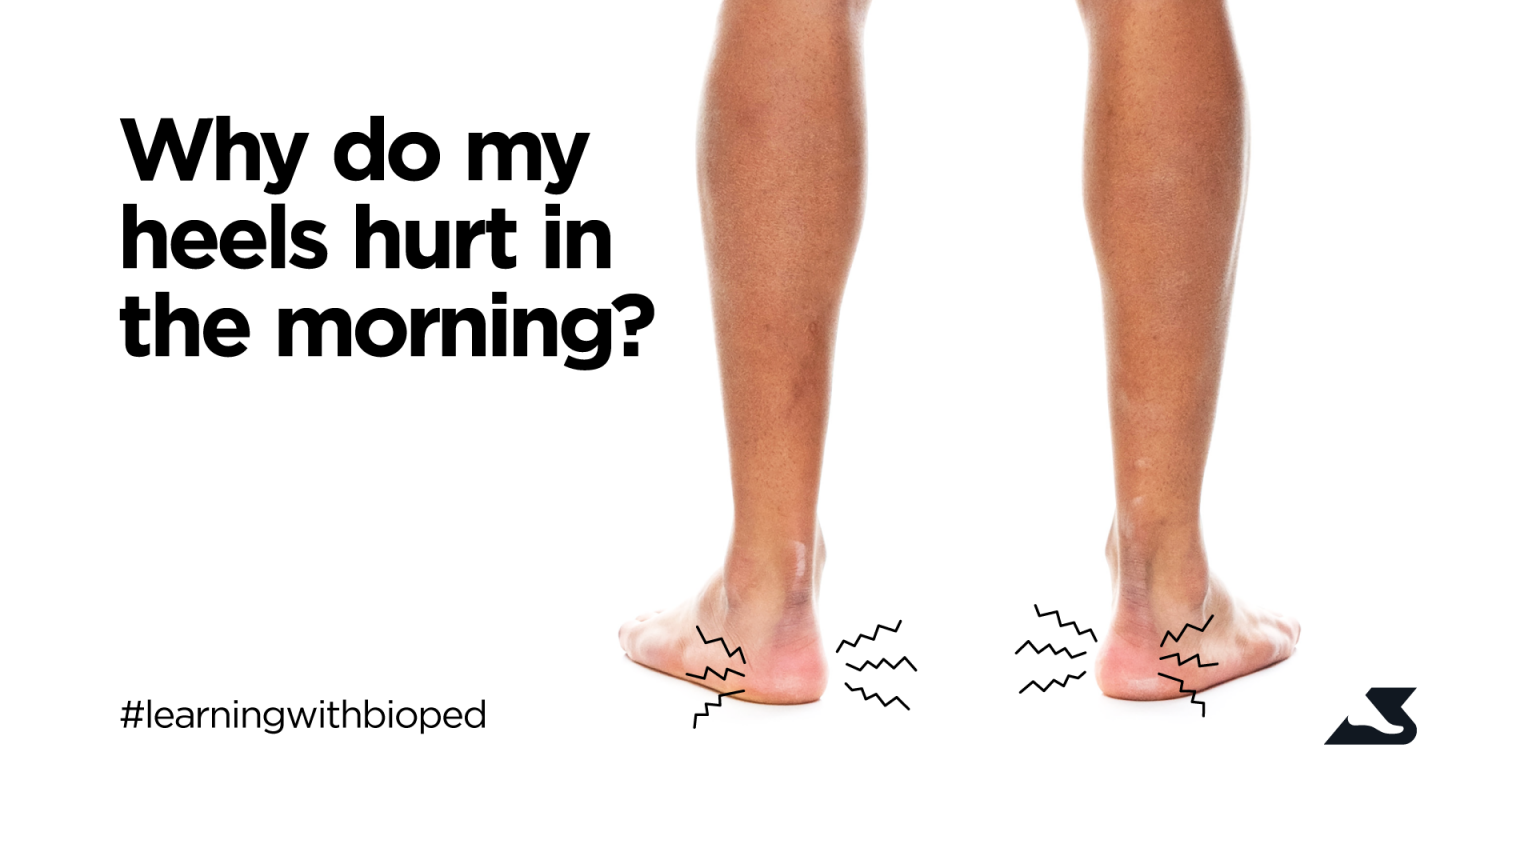 Why do my heels hurt in the morning?